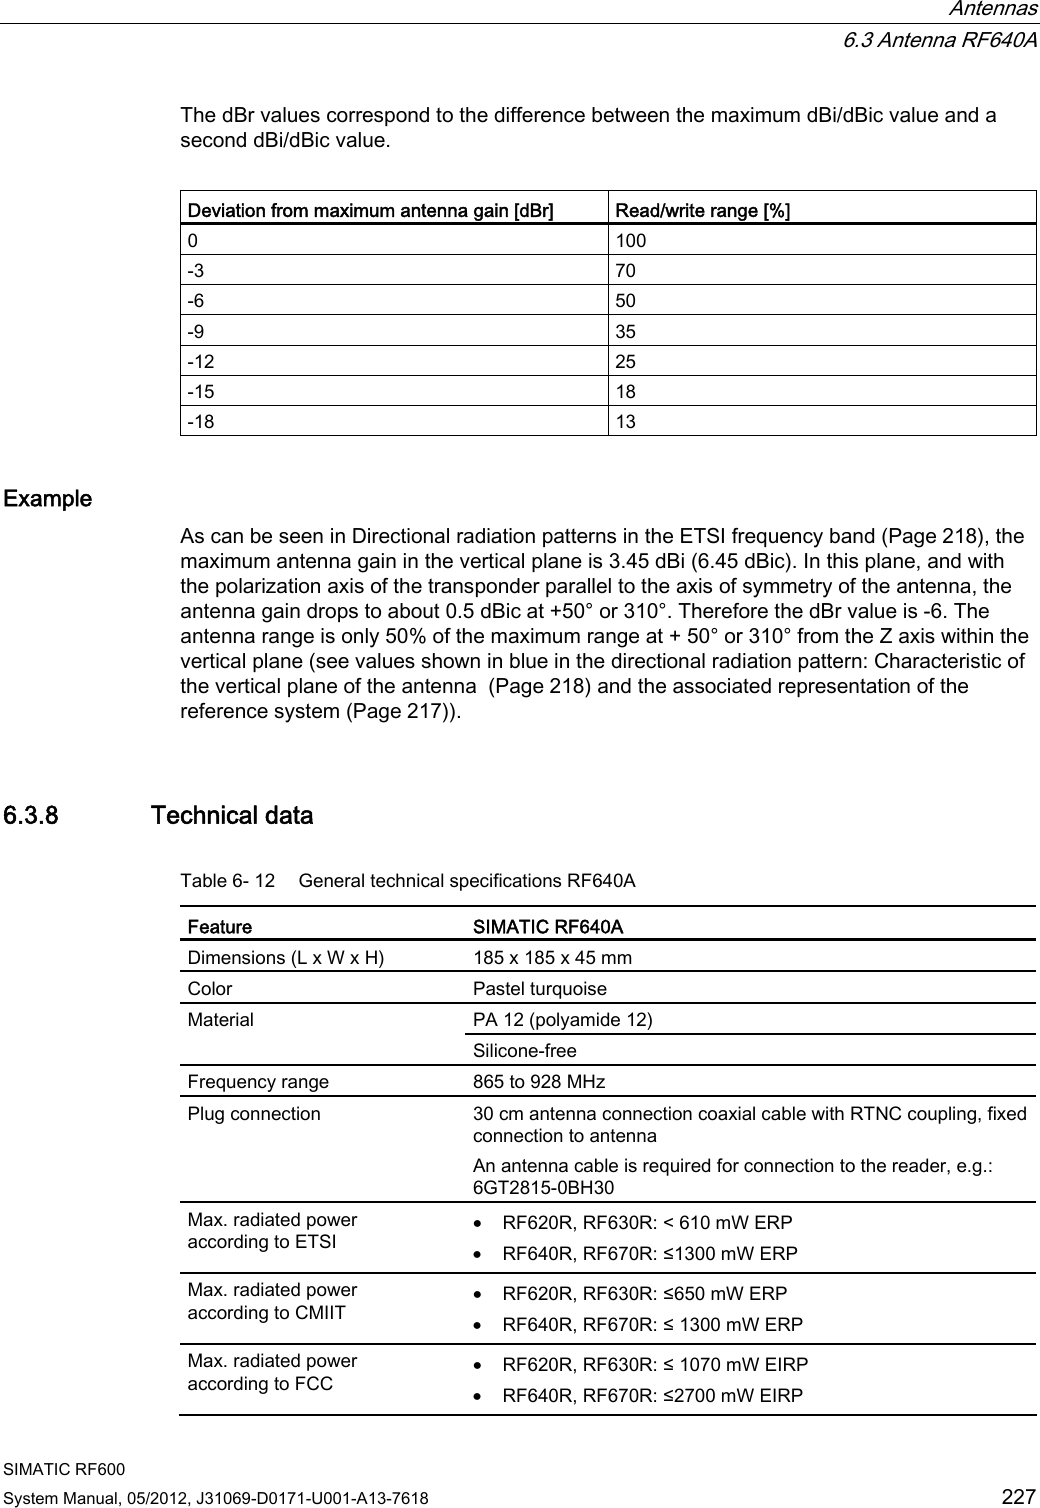  Antennas  6.3 Antenna RF640A SIMATIC RF600 System Manual, 05/2012, J31069-D0171-U001-A13-7618  227 The dBr values correspond to the difference between the maximum dBi/dBic value and a second dBi/dBic value.  Deviation from maximum antenna gain [dBr]  Read/write range [%] 0  100 -3  70 -6  50 -9  35 -12  25 -15  18 -18  13 Example As can be seen in Directional radiation patterns in the ETSI frequency band (Page 218), the maximum antenna gain in the vertical plane is 3.45 dBi (6.45 dBic). In this plane, and with the polarization axis of the transponder parallel to the axis of symmetry of the antenna, the antenna gain drops to about 0.5 dBic at +50° or 310°. Therefore the dBr value is -6. The antenna range is only 50% of the maximum range at + 50° or 310° from the Z axis within the vertical plane (see values shown in blue in the directional radiation pattern: Characteristic of the vertical plane of the antenna  (Page 218) and the associated representation of the reference system (Page 217)). 6.3.8 Technical data Table 6- 12  General technical specifications RF640A Feature  SIMATIC RF640A Dimensions (L x W x H)  185 x 185 x 45 mm Color  Pastel turquoise PA 12 (polyamide 12) Material Silicone-free Frequency range  865 to 928 MHz Plug connection  30 cm antenna connection coaxial cable with RTNC coupling, fixed connection to antenna An antenna cable is required for connection to the reader, e.g.: 6GT2815-0BH30 Max. radiated power according to ETSI • RF620R, RF630R: &lt; 610 mW ERP • RF640R, RF670R: ≤1300 mW ERP Max. radiated power according to CMIIT • RF620R, RF630R: ≤650 mW ERP • RF640R, RF670R: ≤ 1300 mW ERP Max. radiated power according to FCC • RF620R, RF630R: ≤ 1070 mW EIRP • RF640R, RF670R: ≤2700 mW EIRP 